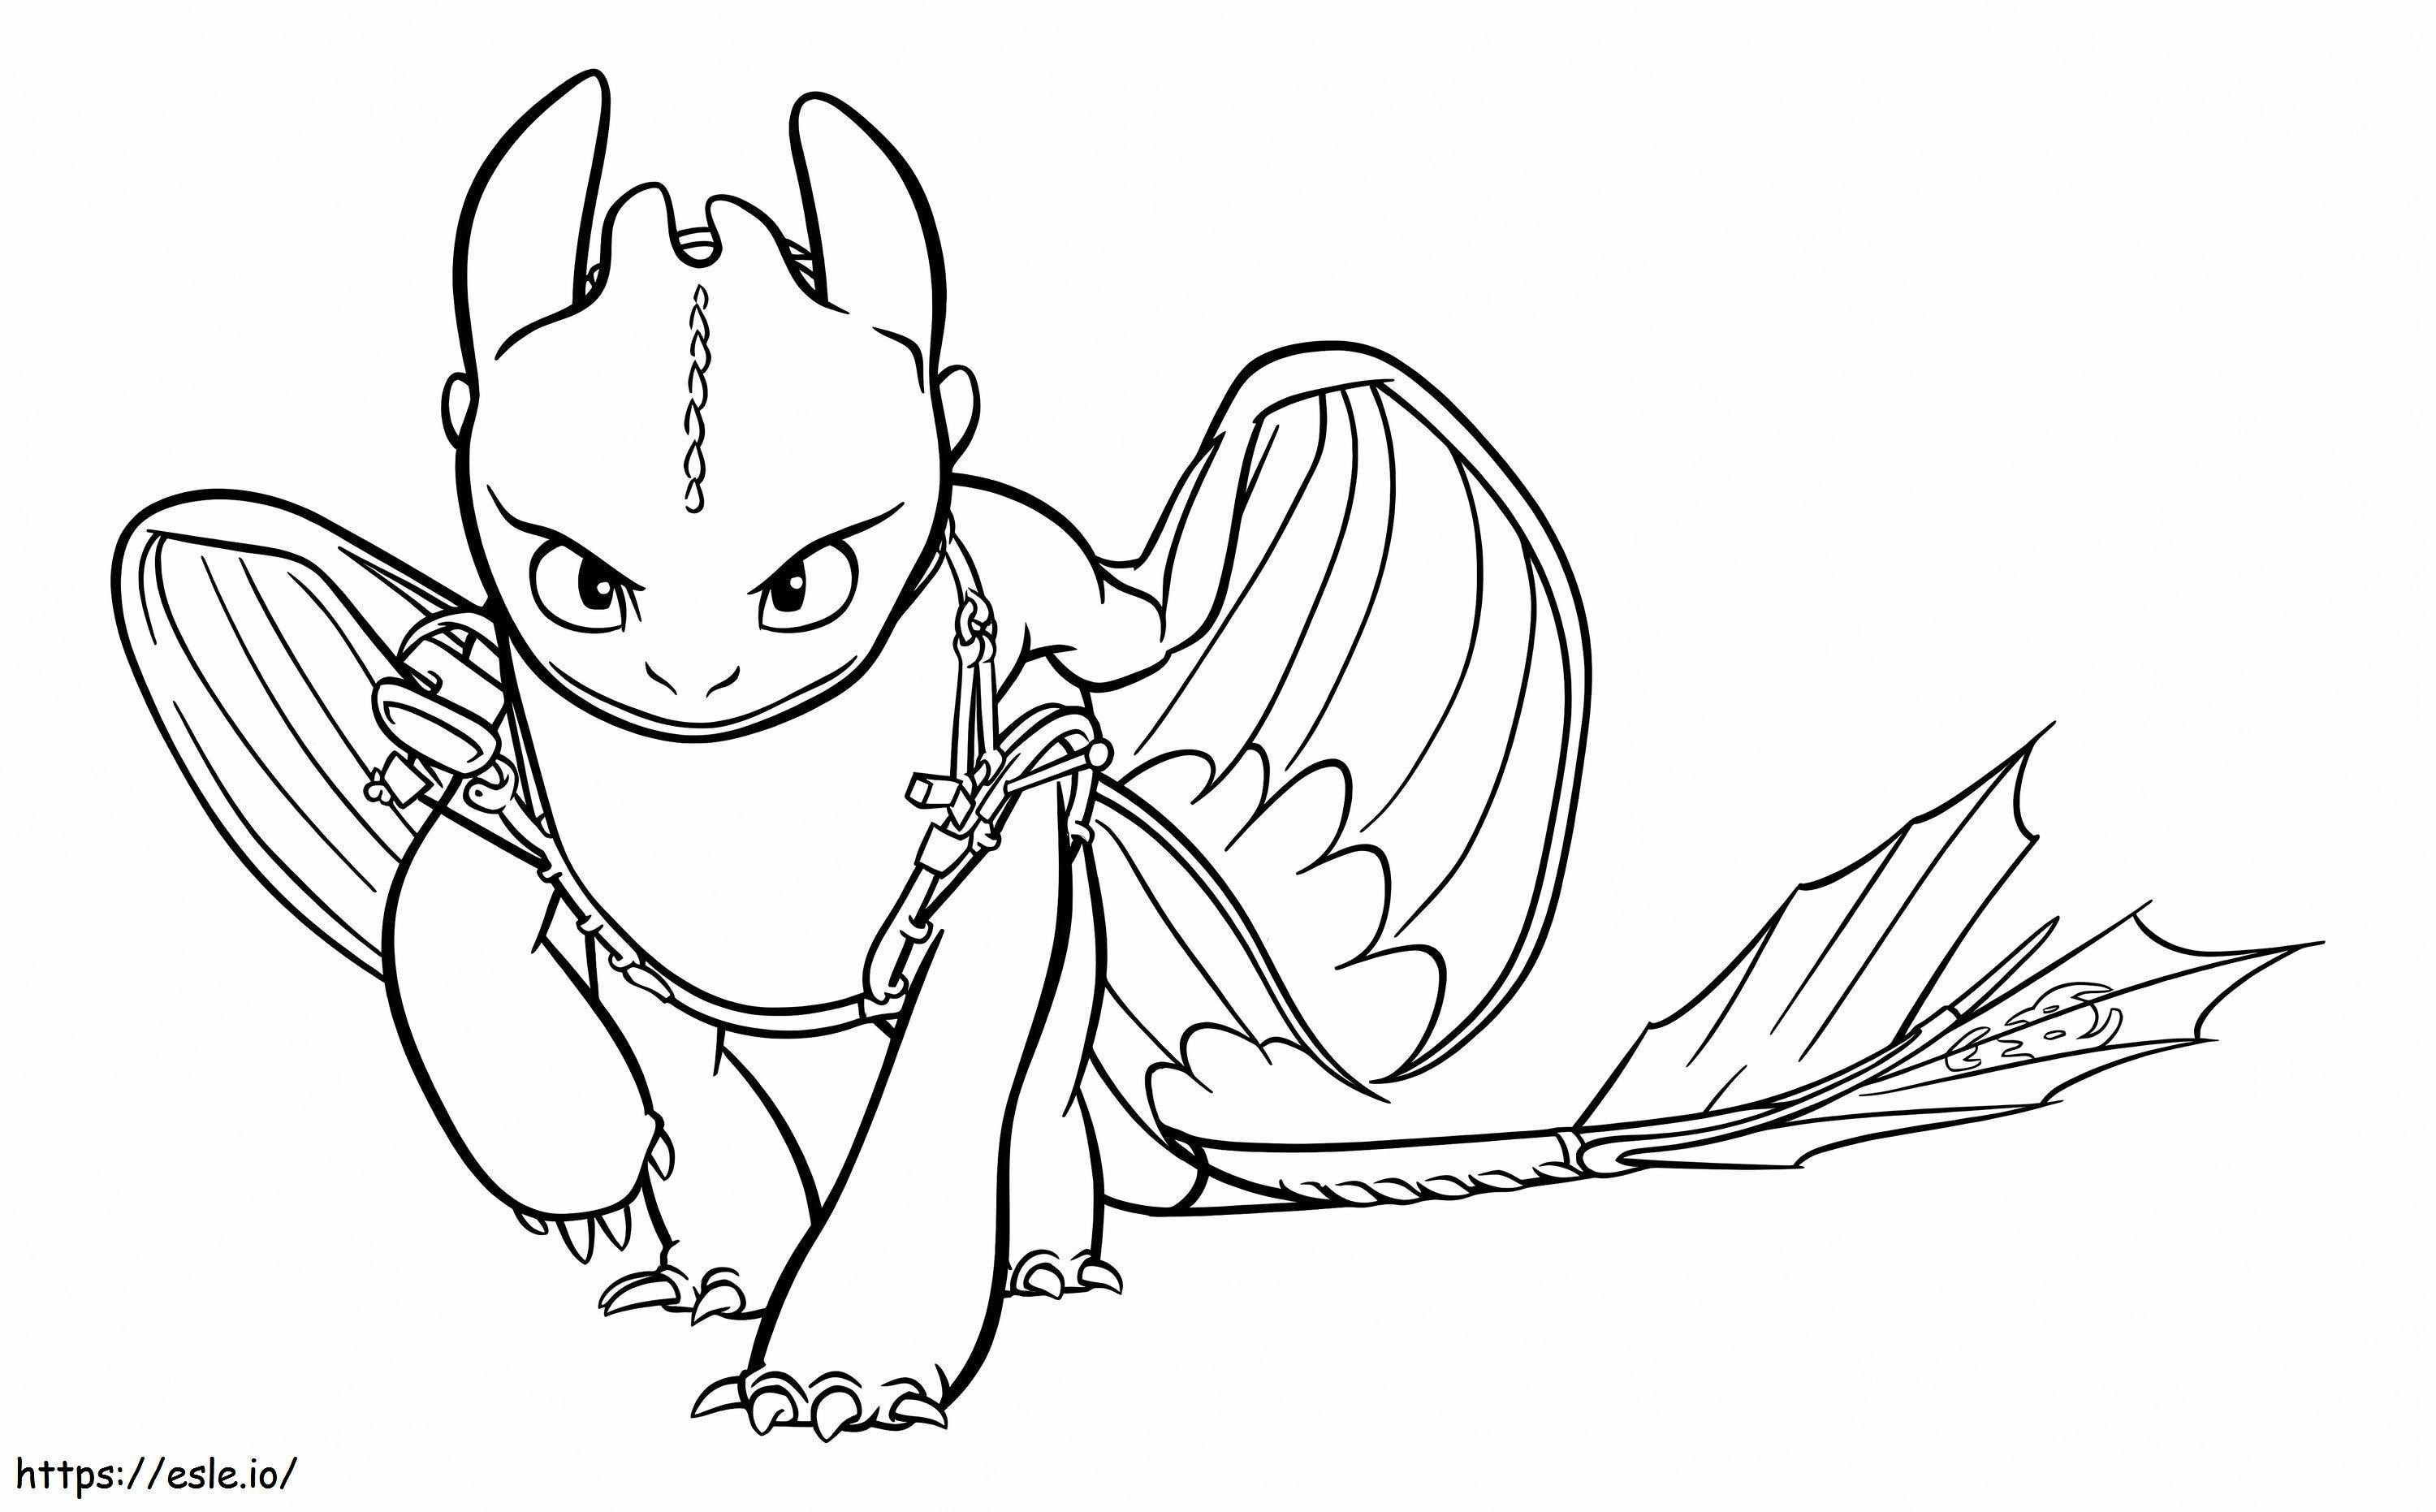 Awesome Toothless coloring page